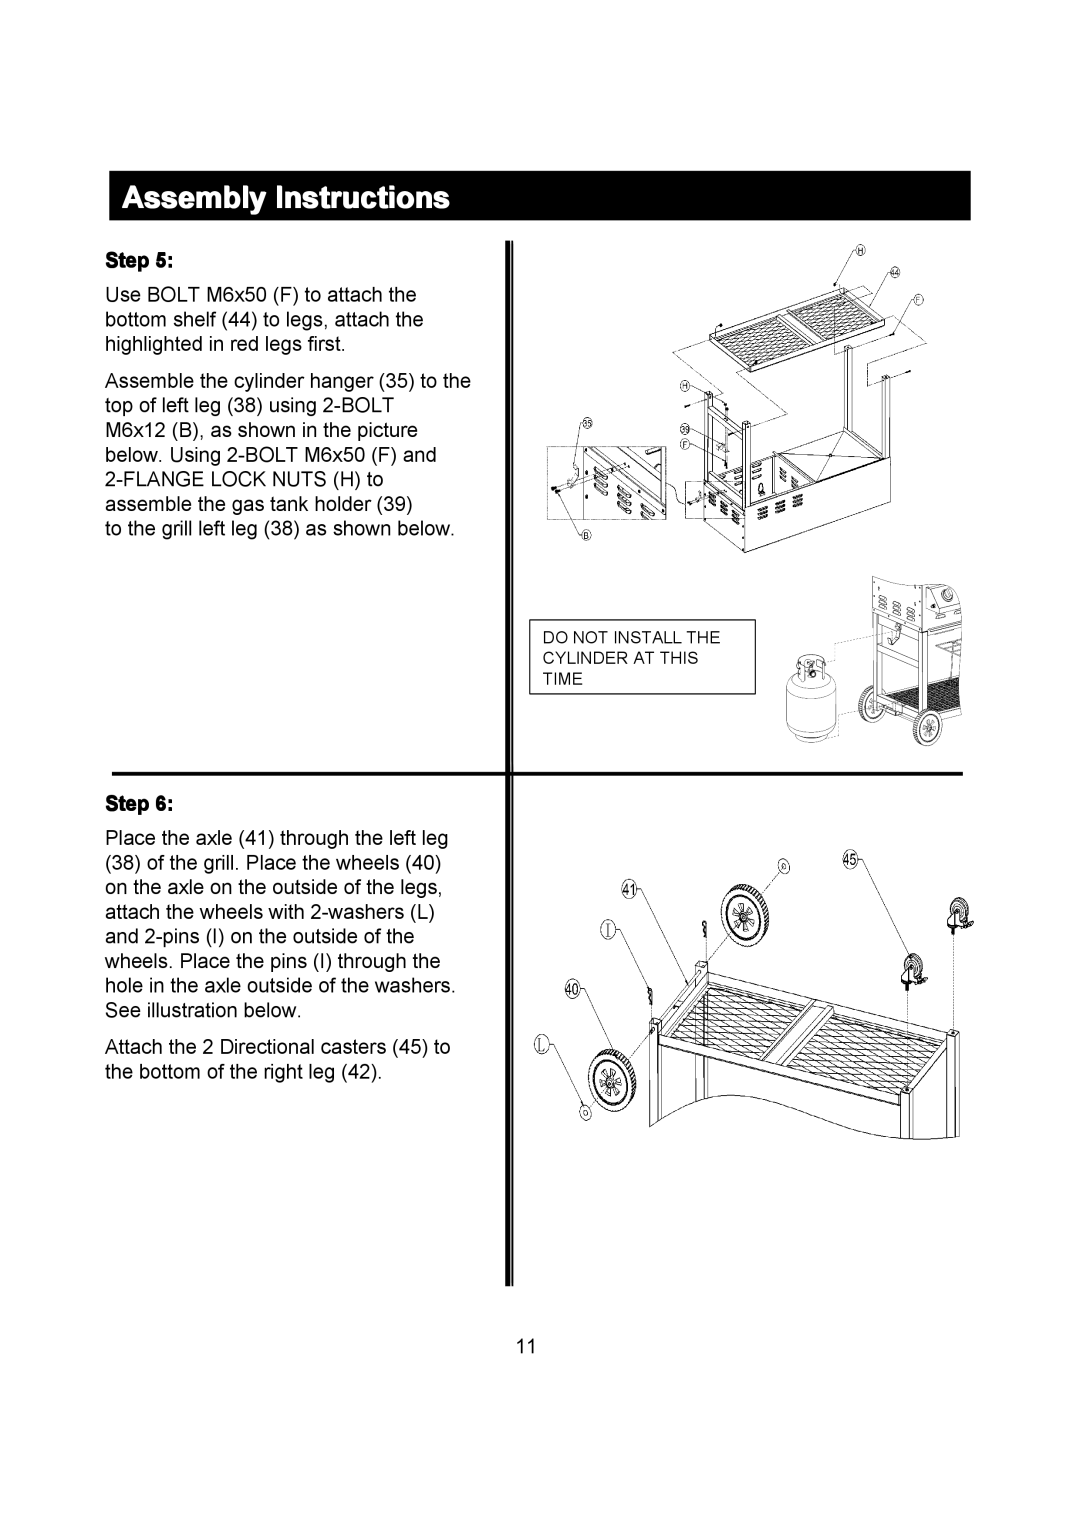 Outdoor Gourmet CG3023E instruction manual Assembly Instructions, Step, to the grill left leg 38 as shown below 